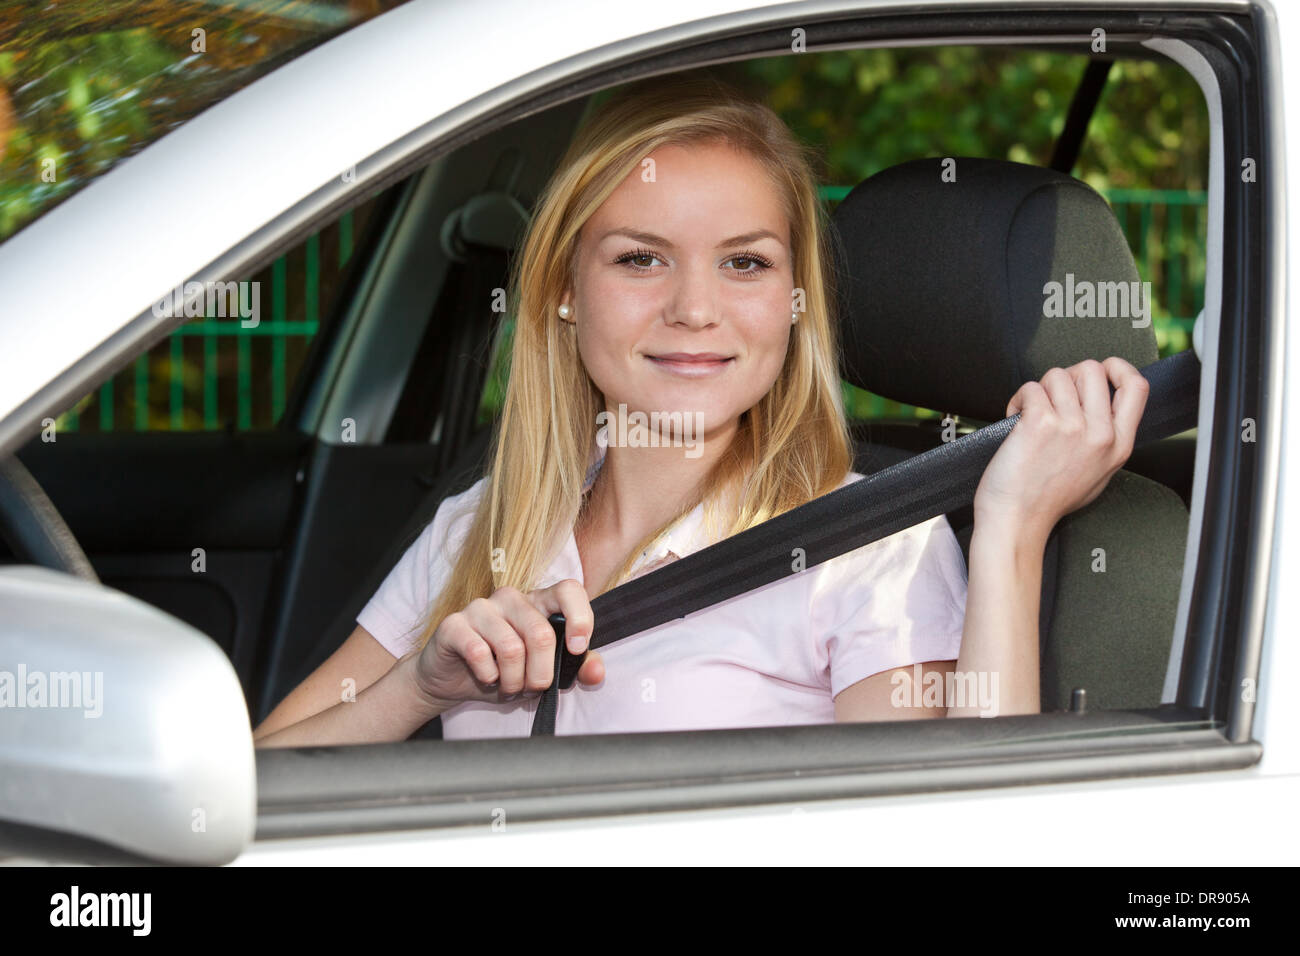 Attractive young woman in her car. Stock Photo